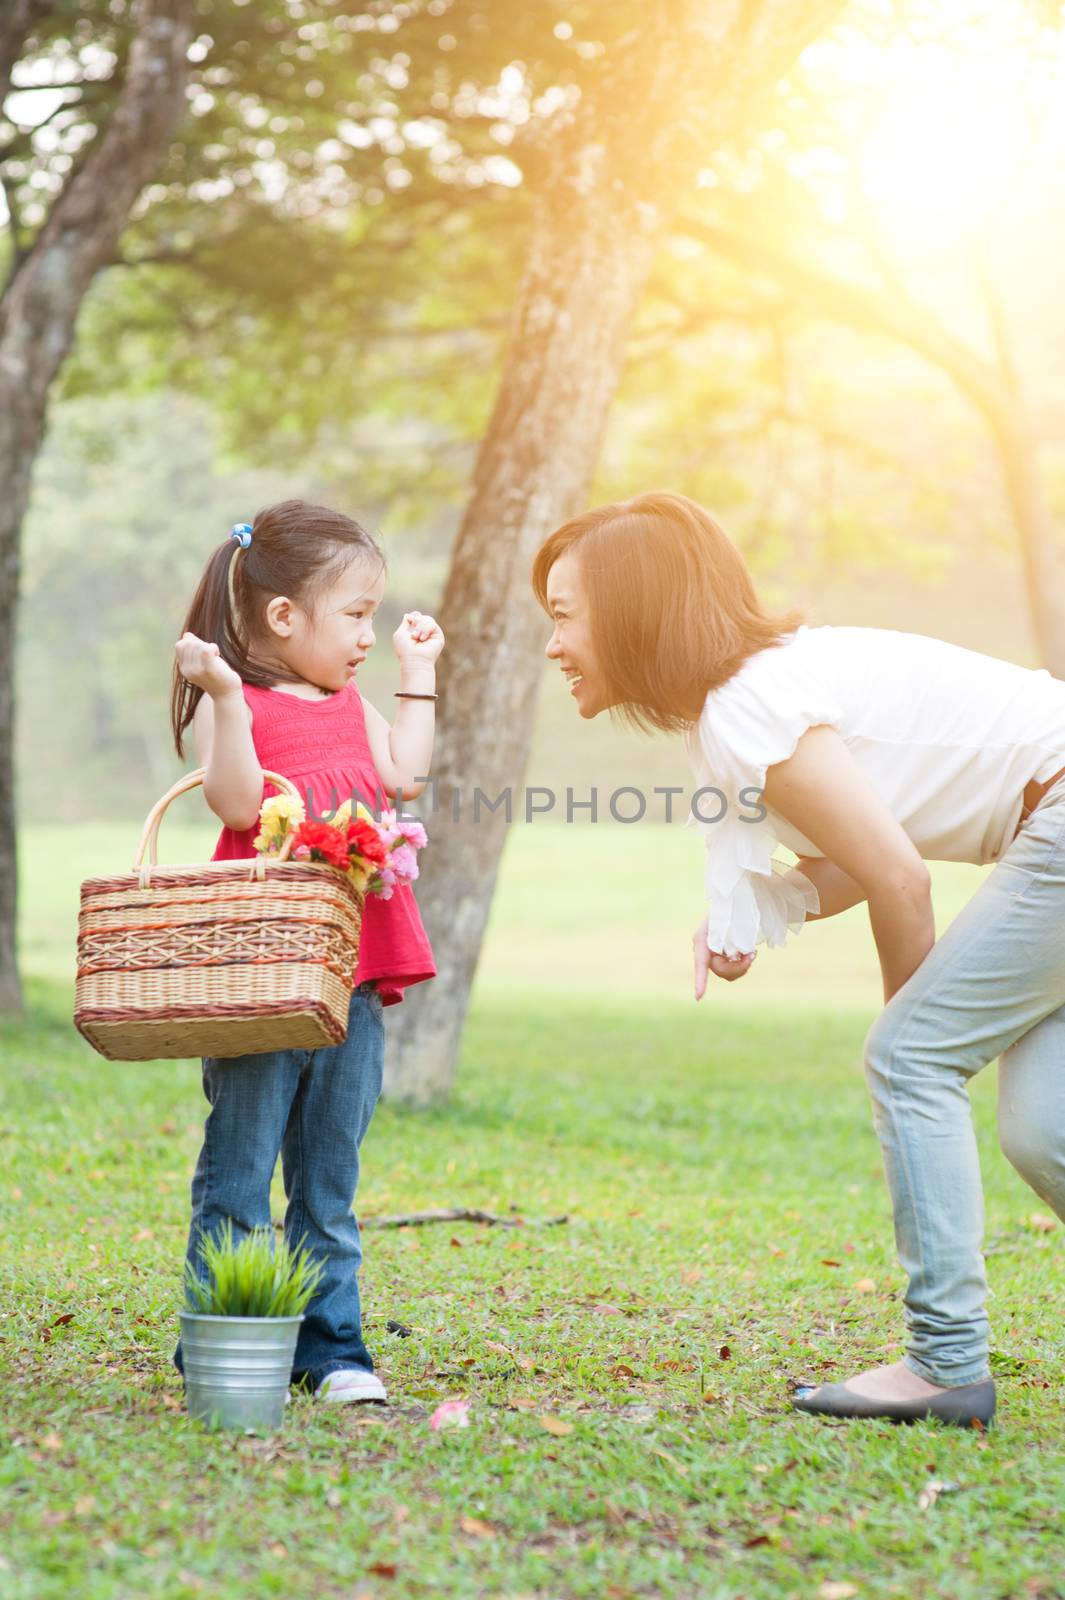 Lifestyle portrait mom and daughter in happiness at the outside in the meadow, family outdoor fun, morning with sun flare.